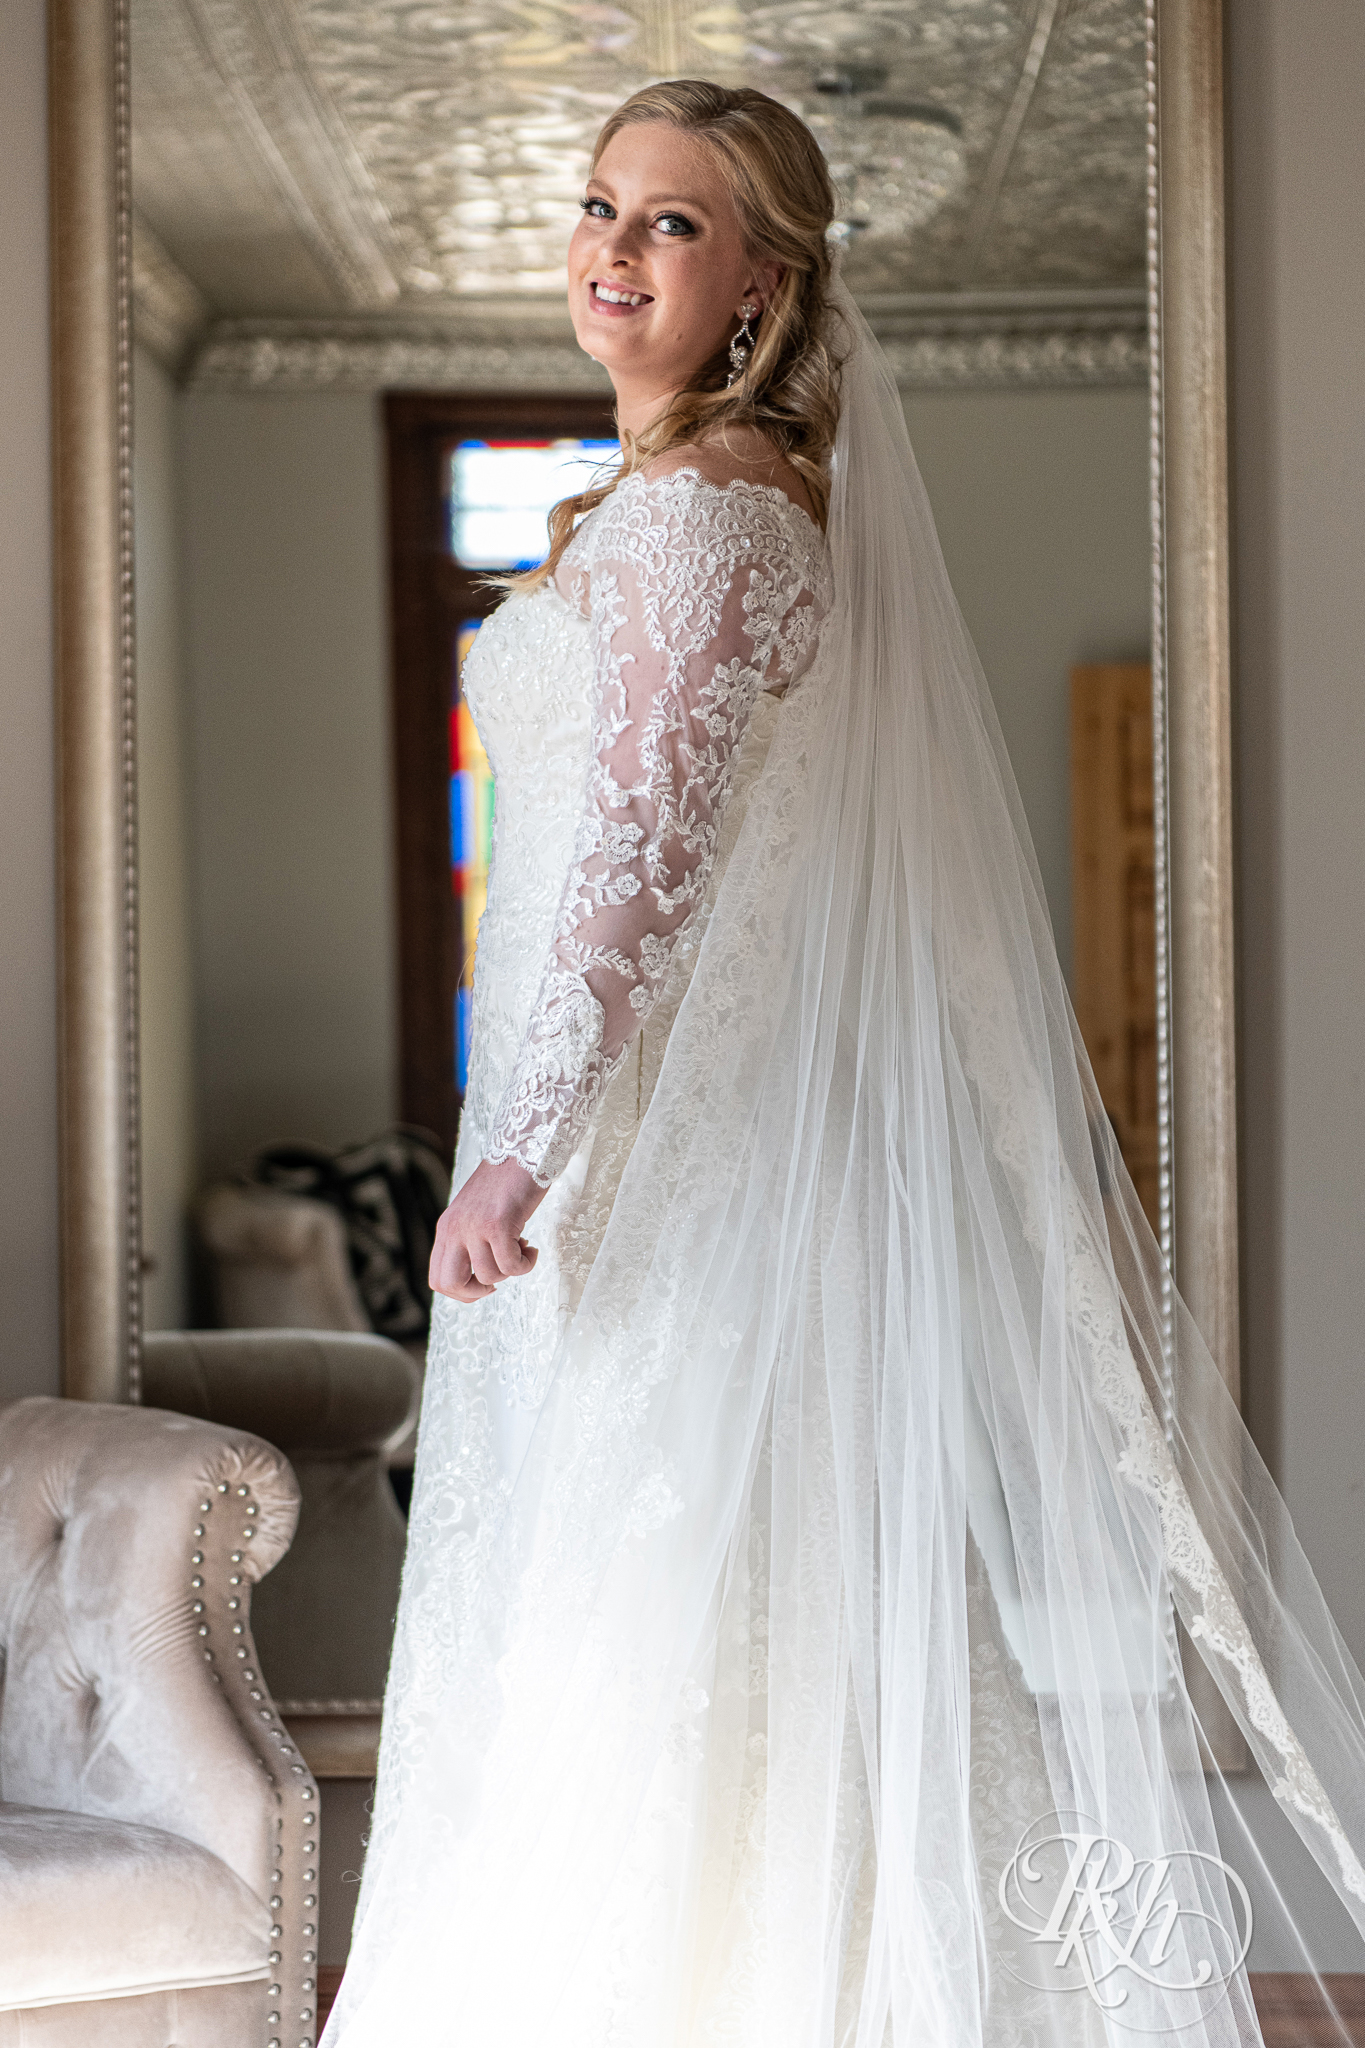 Bride standing in front of mirror in long sleeve wedding dress and cathedral veil at Weddings at the Broz in New Prague, Minnesota.